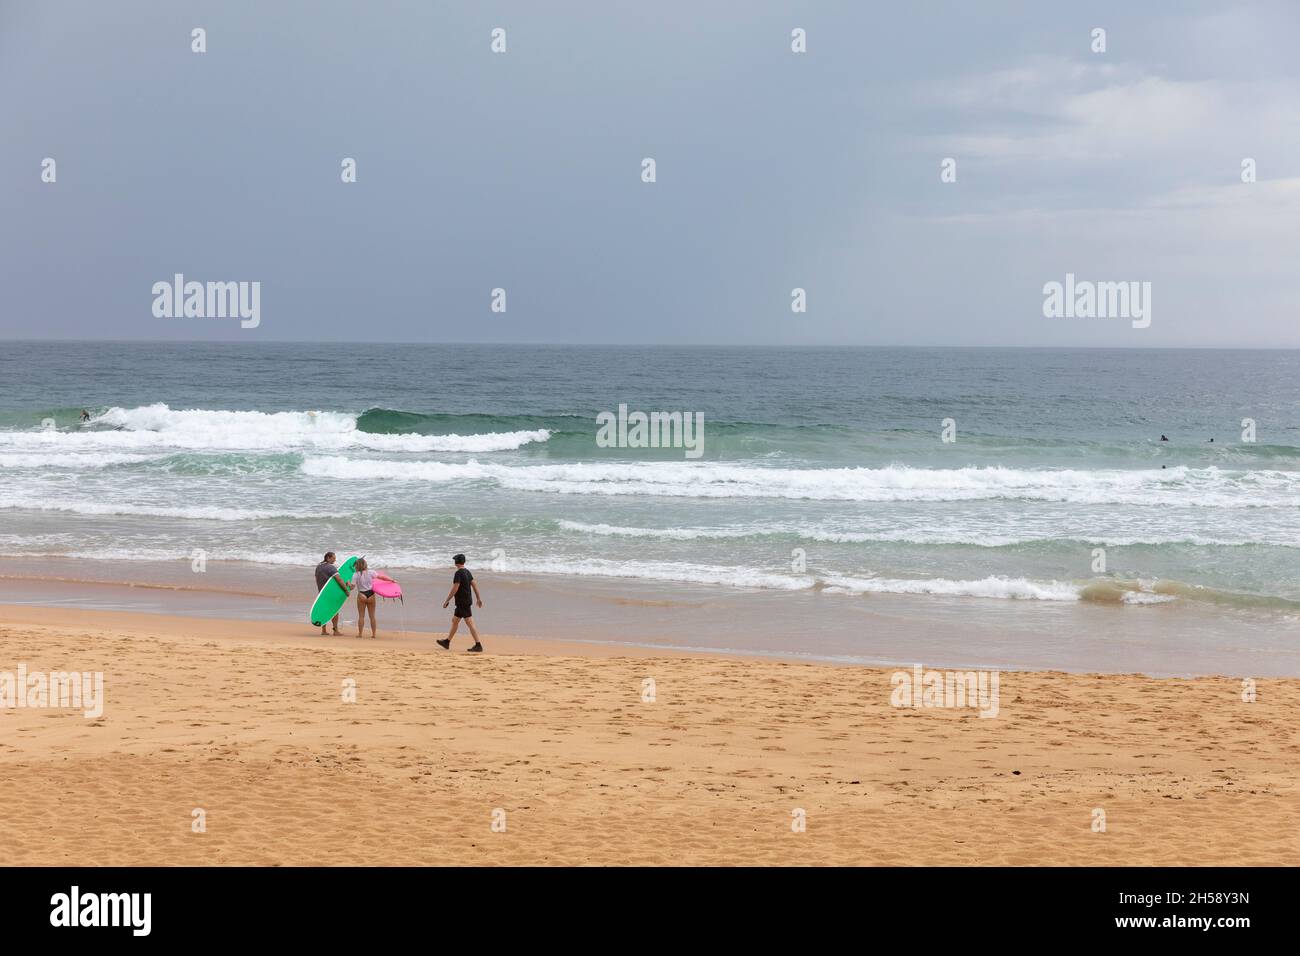 Two surfers stood on Manly beach as man in black exercising walks past,Sydney overcast day,Australia Stock Photo